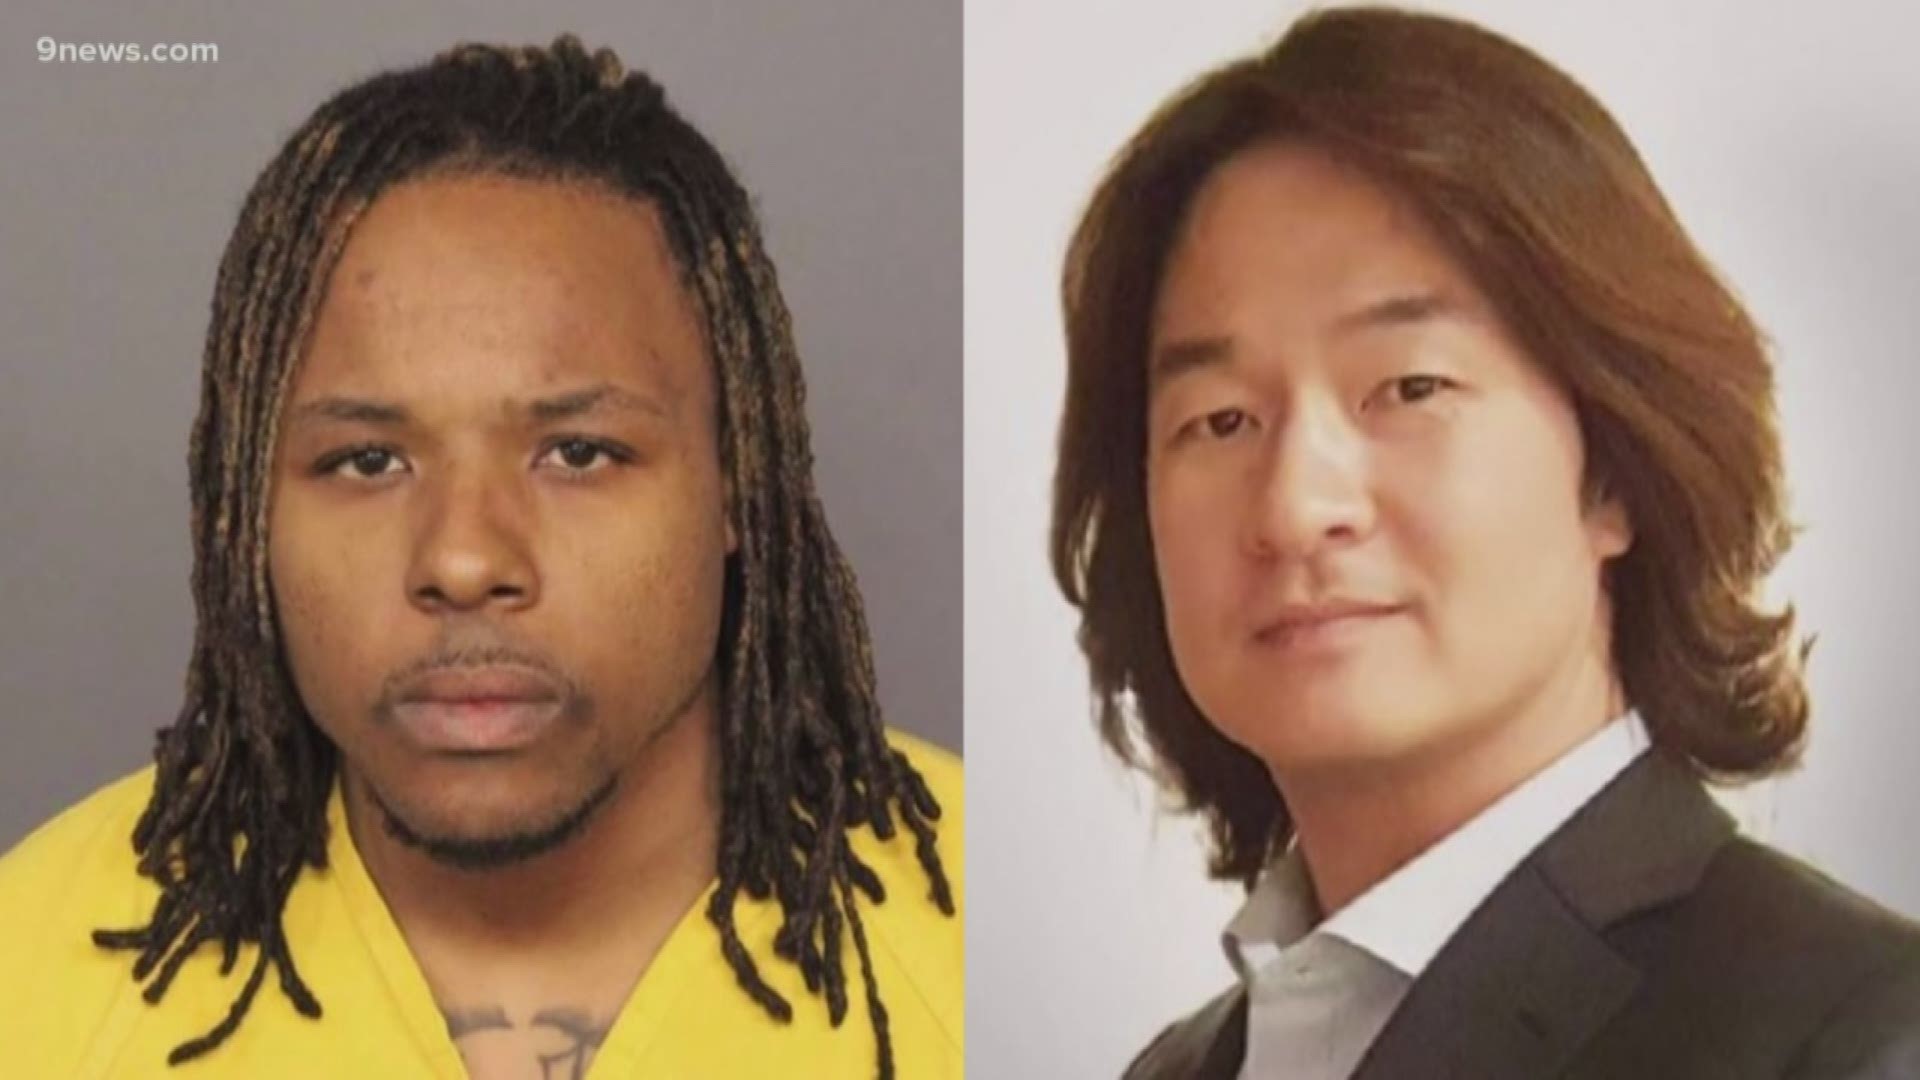 Michael Hancock, 31, is charged with first-degree murder in connection with the shooting death of Hyun Kim last year on Interstate 25.